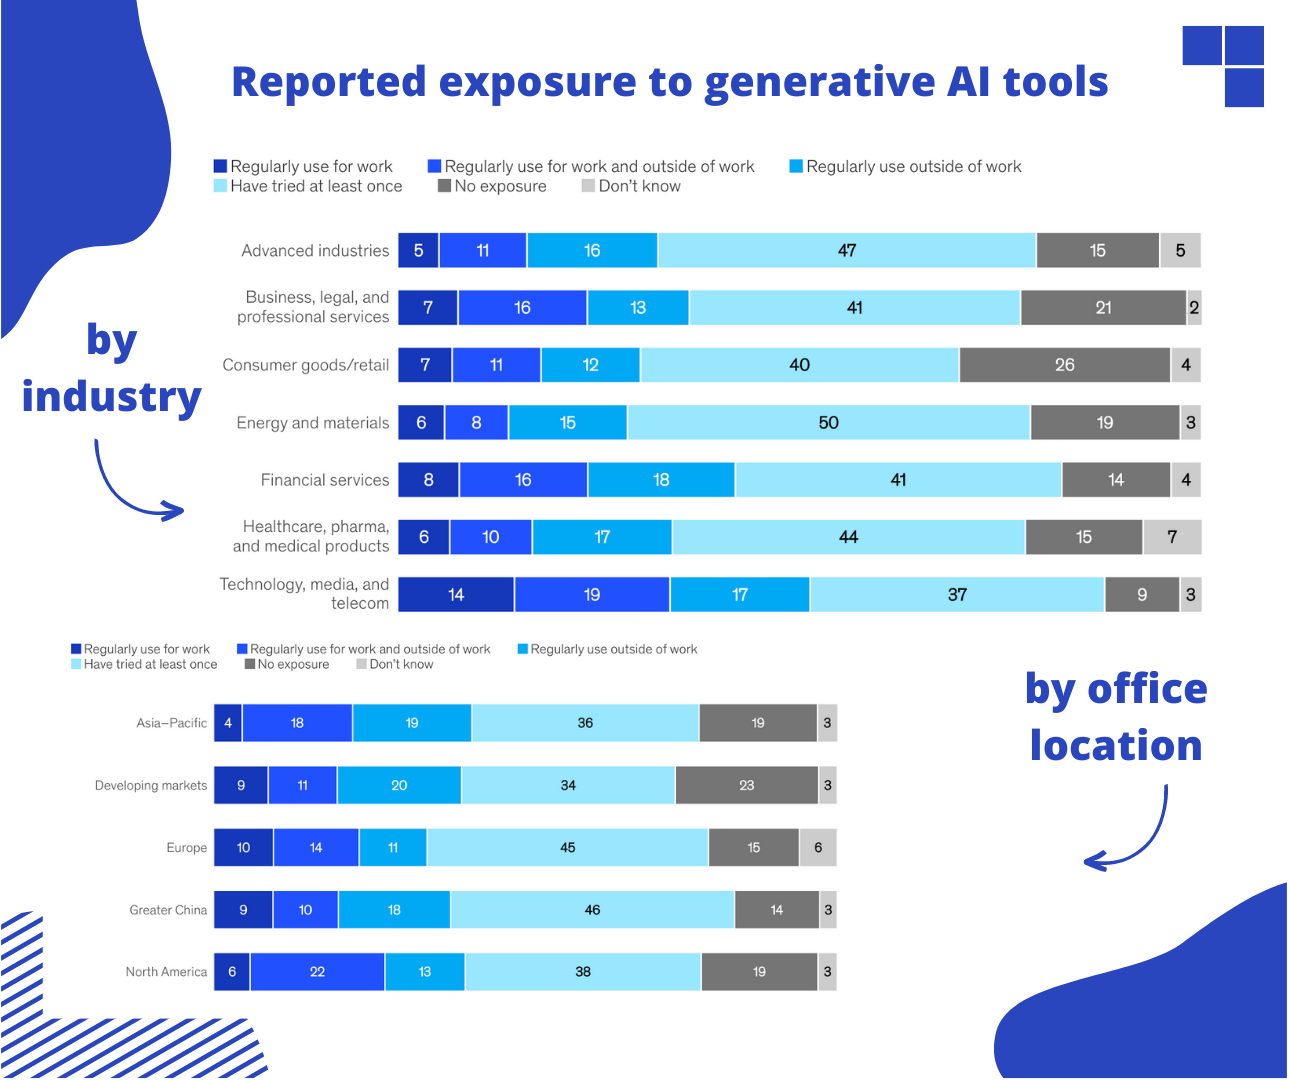 Reported exposure to generative AI tools, % of respondents